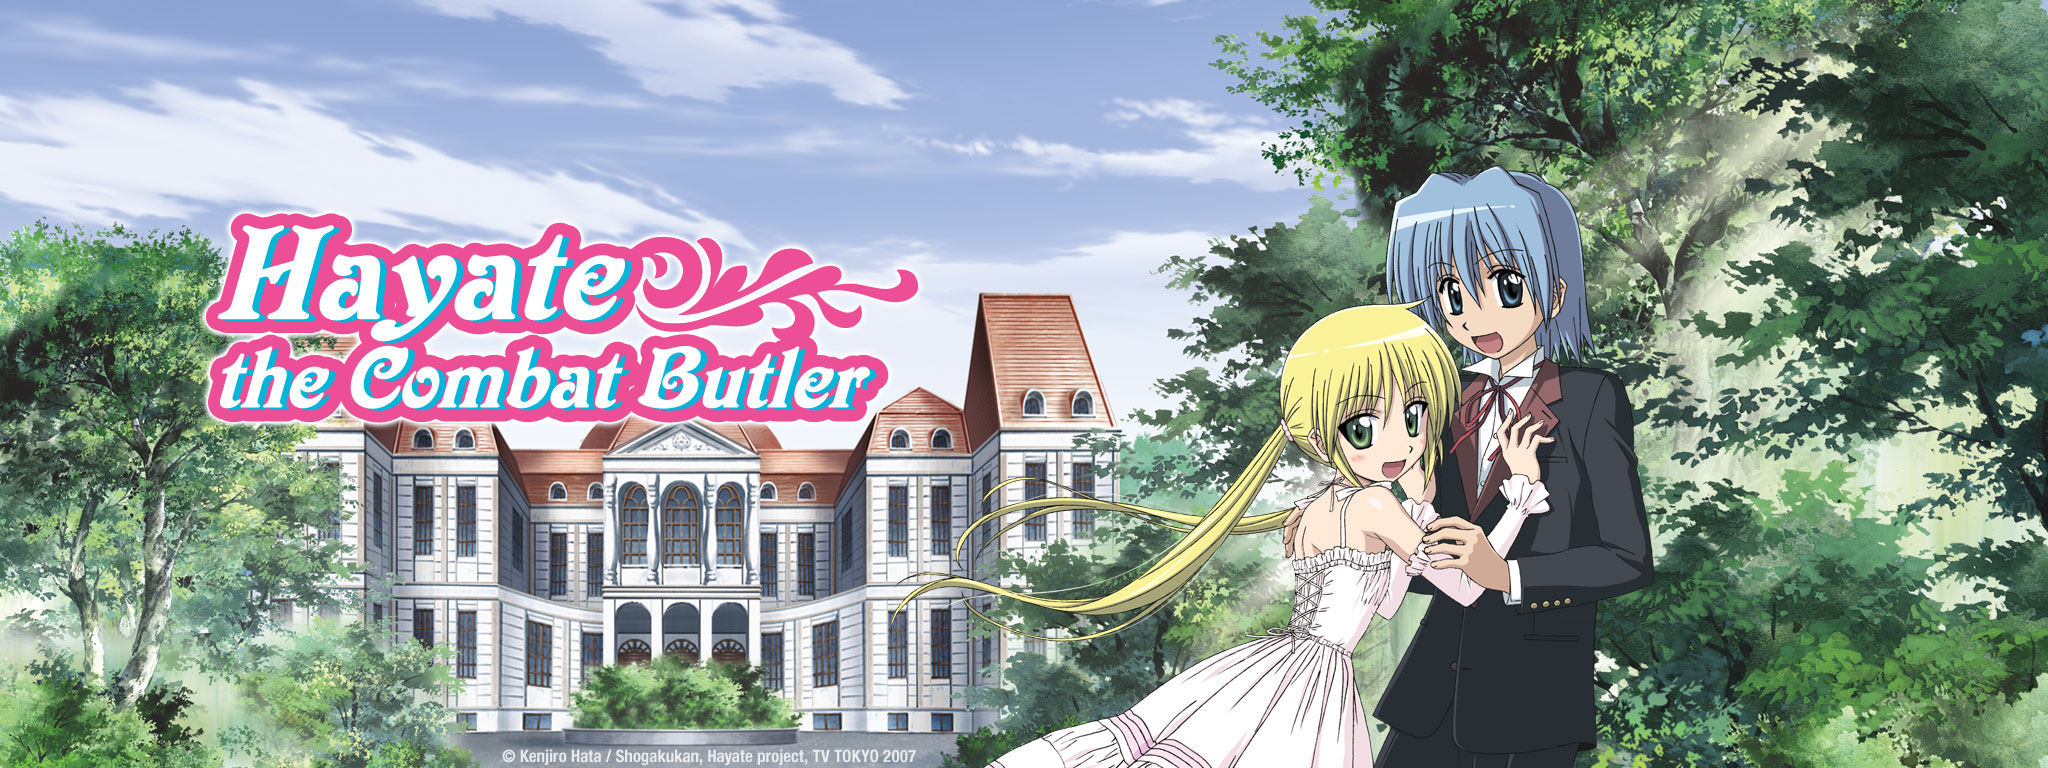 Title Art for Hayate the Combat Butler